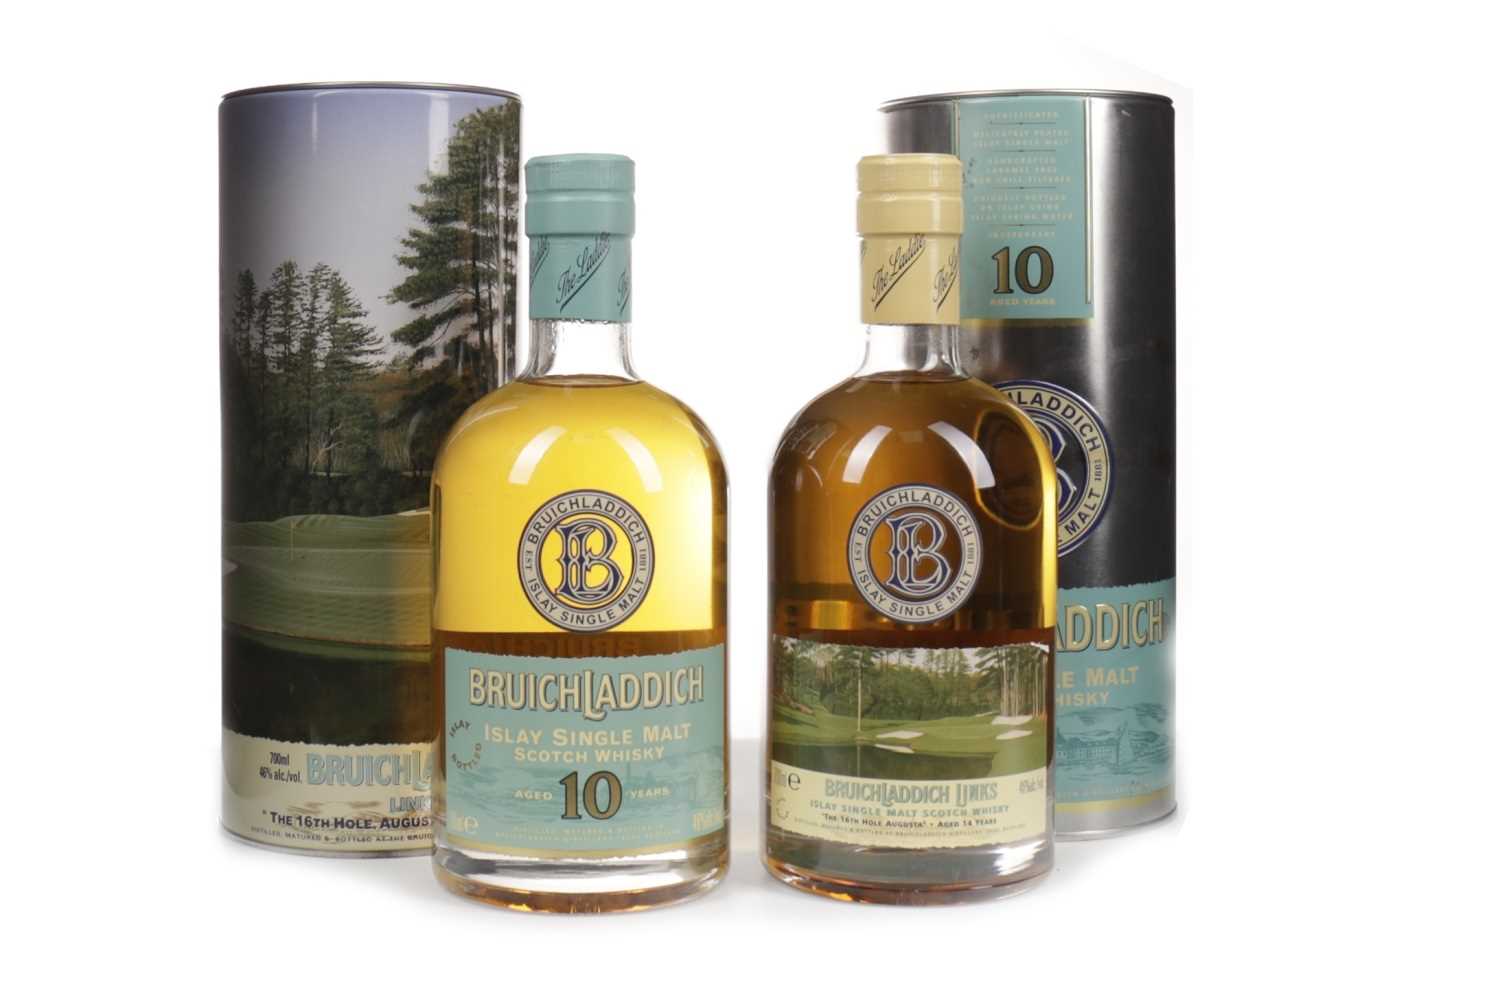 Lot 359 - BRUICHLADDICH AUGUSTA LINIKS AGED 14 YEARS, AND AGED 10 YEARS